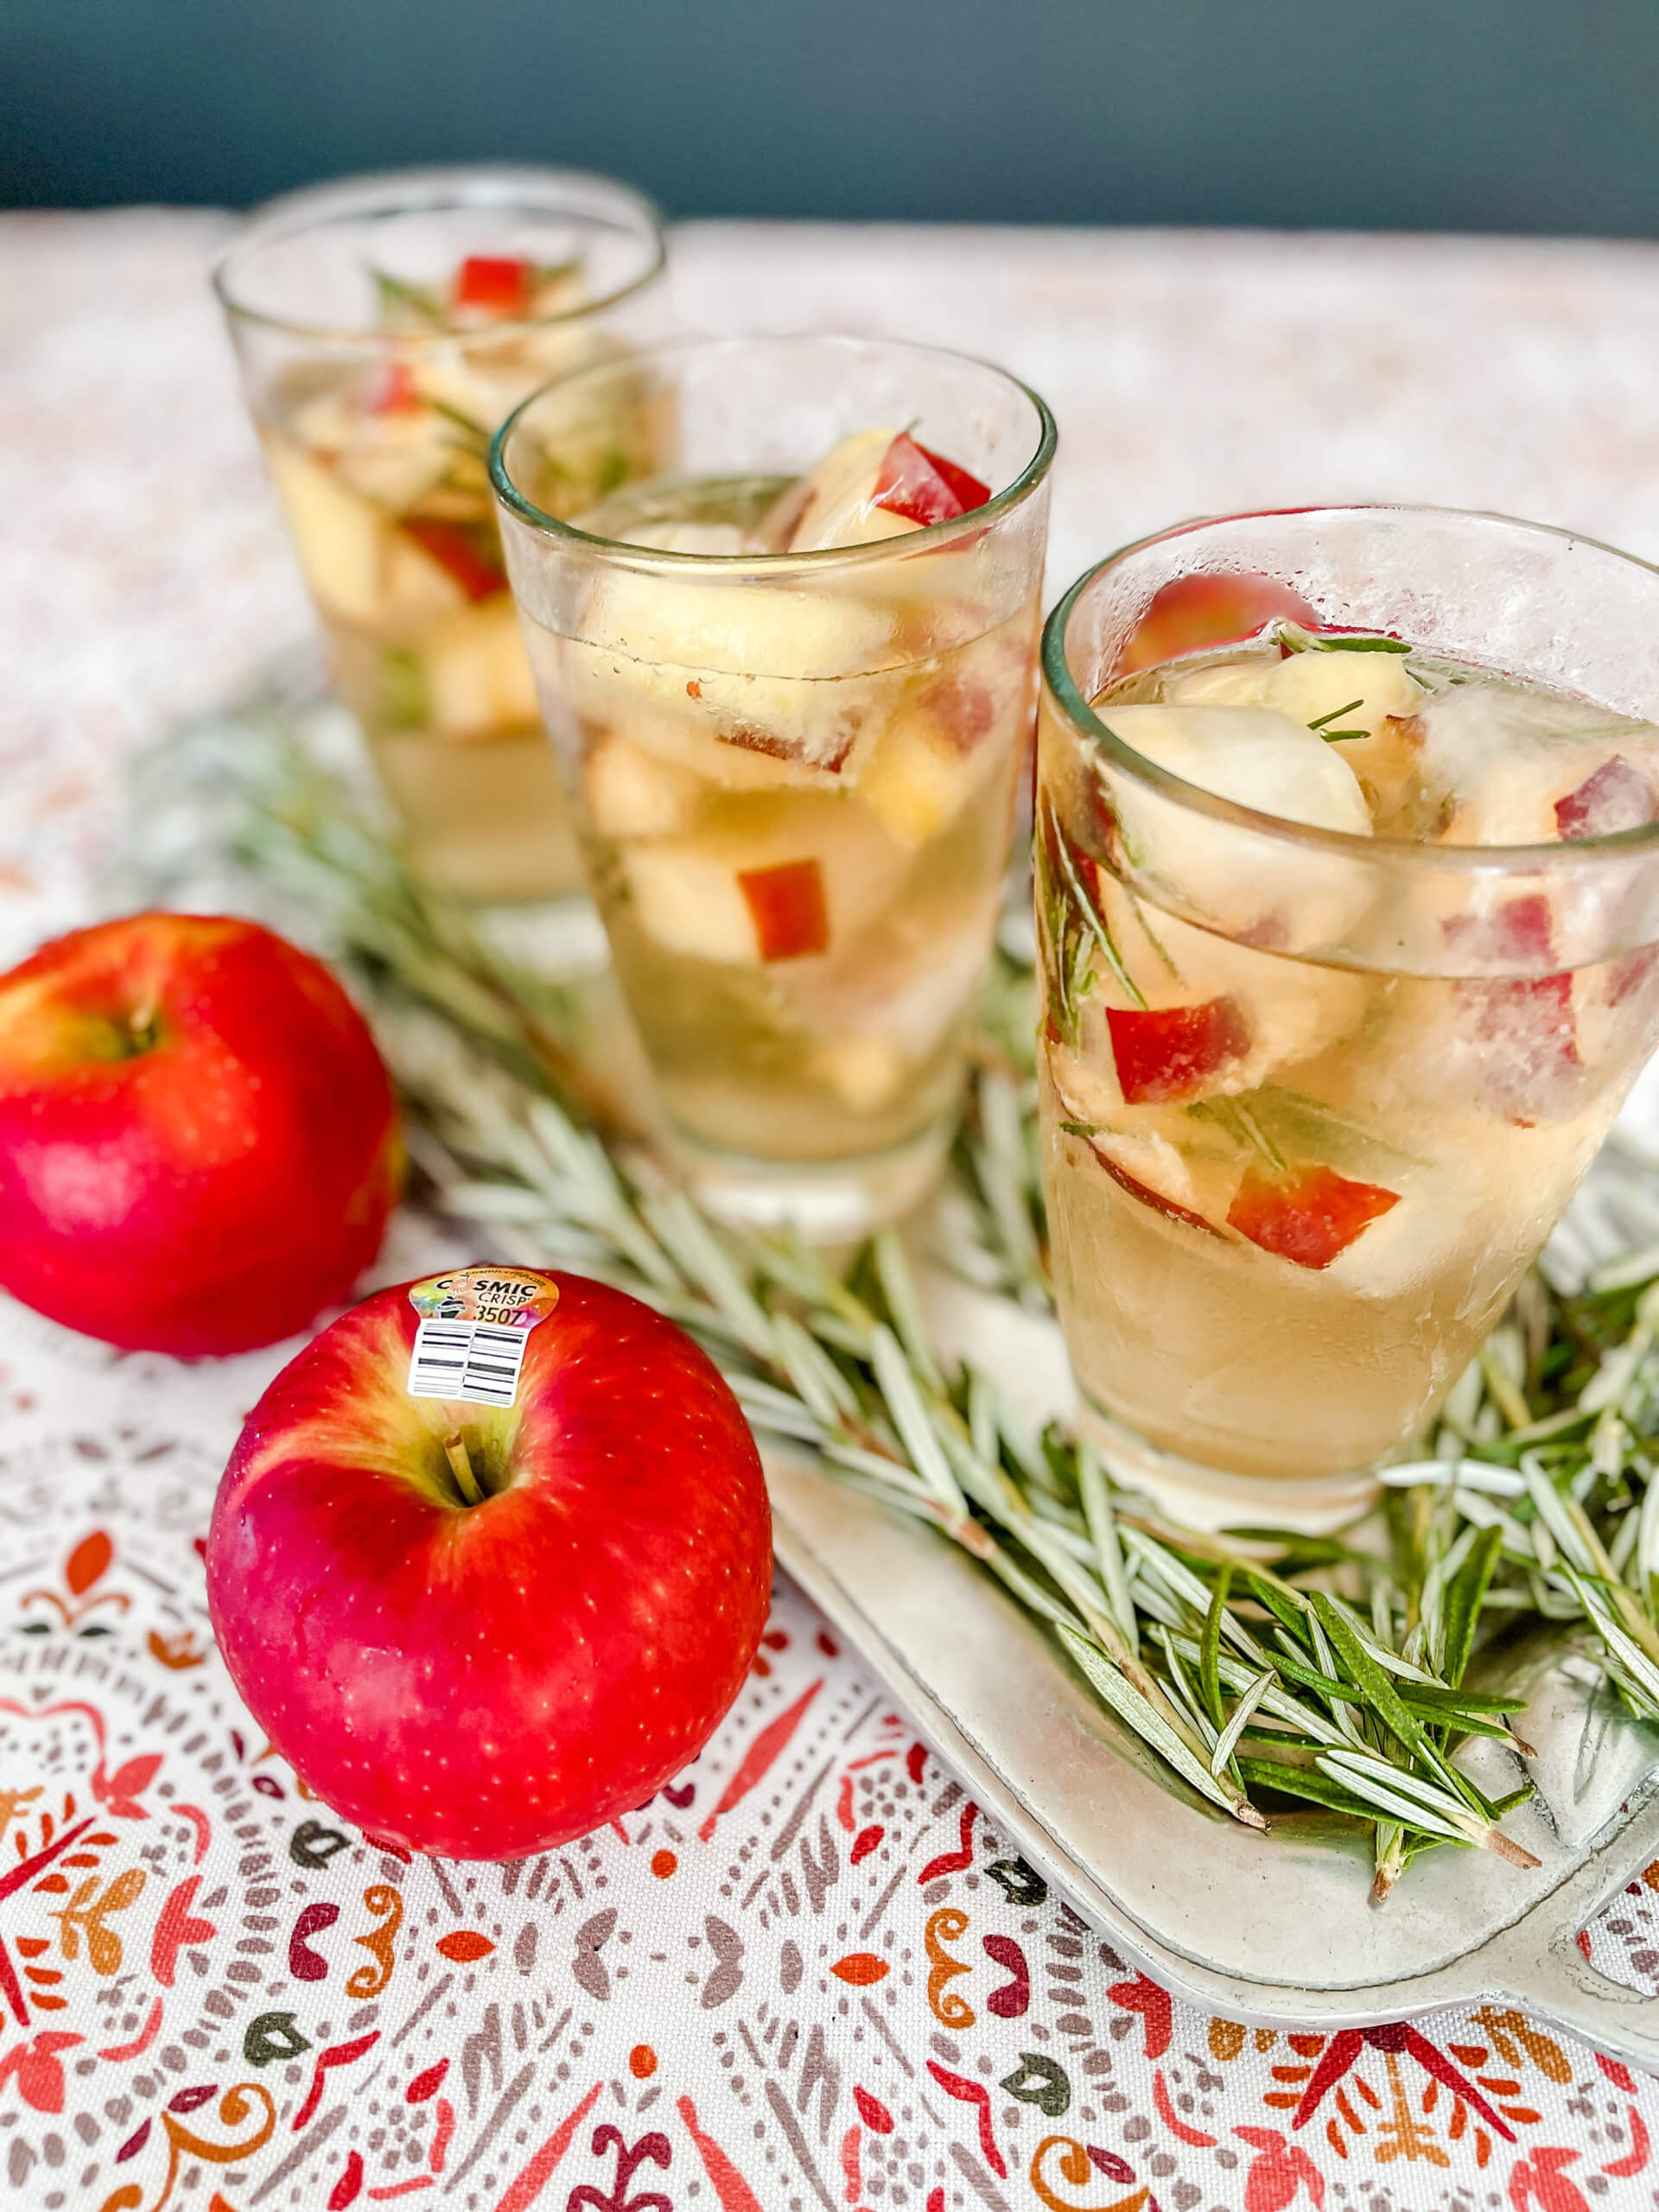 Glasses filled with Ginger Apple Smash ice cubes with Cosmic Crisp apples and sprigs of rosemary on the side.